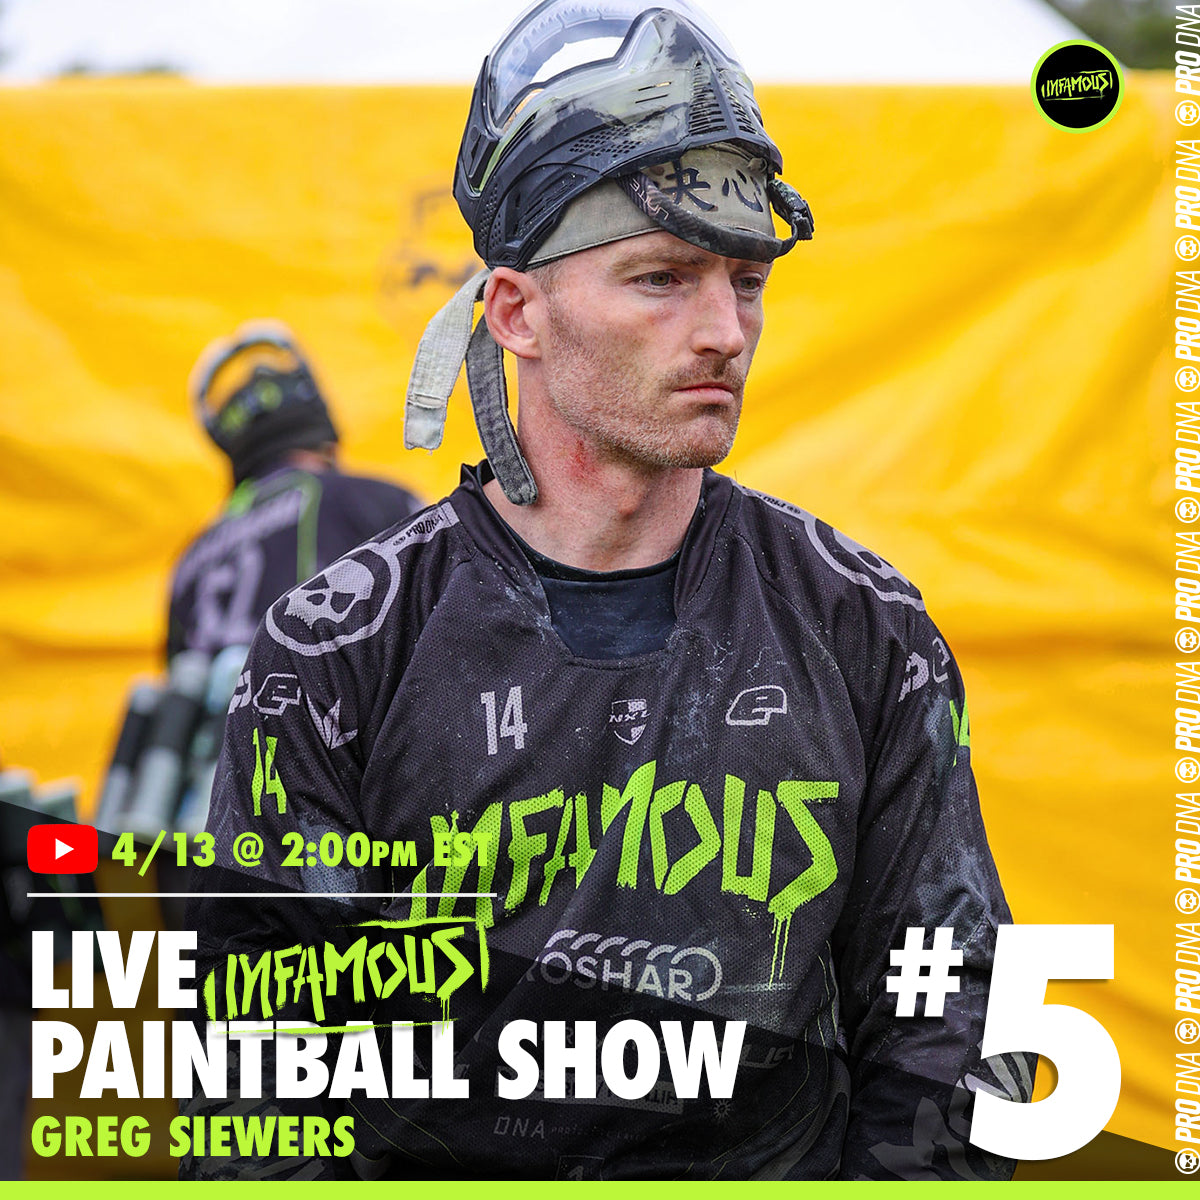 Infamous Live Paintball Show #5 - Greg Siewers